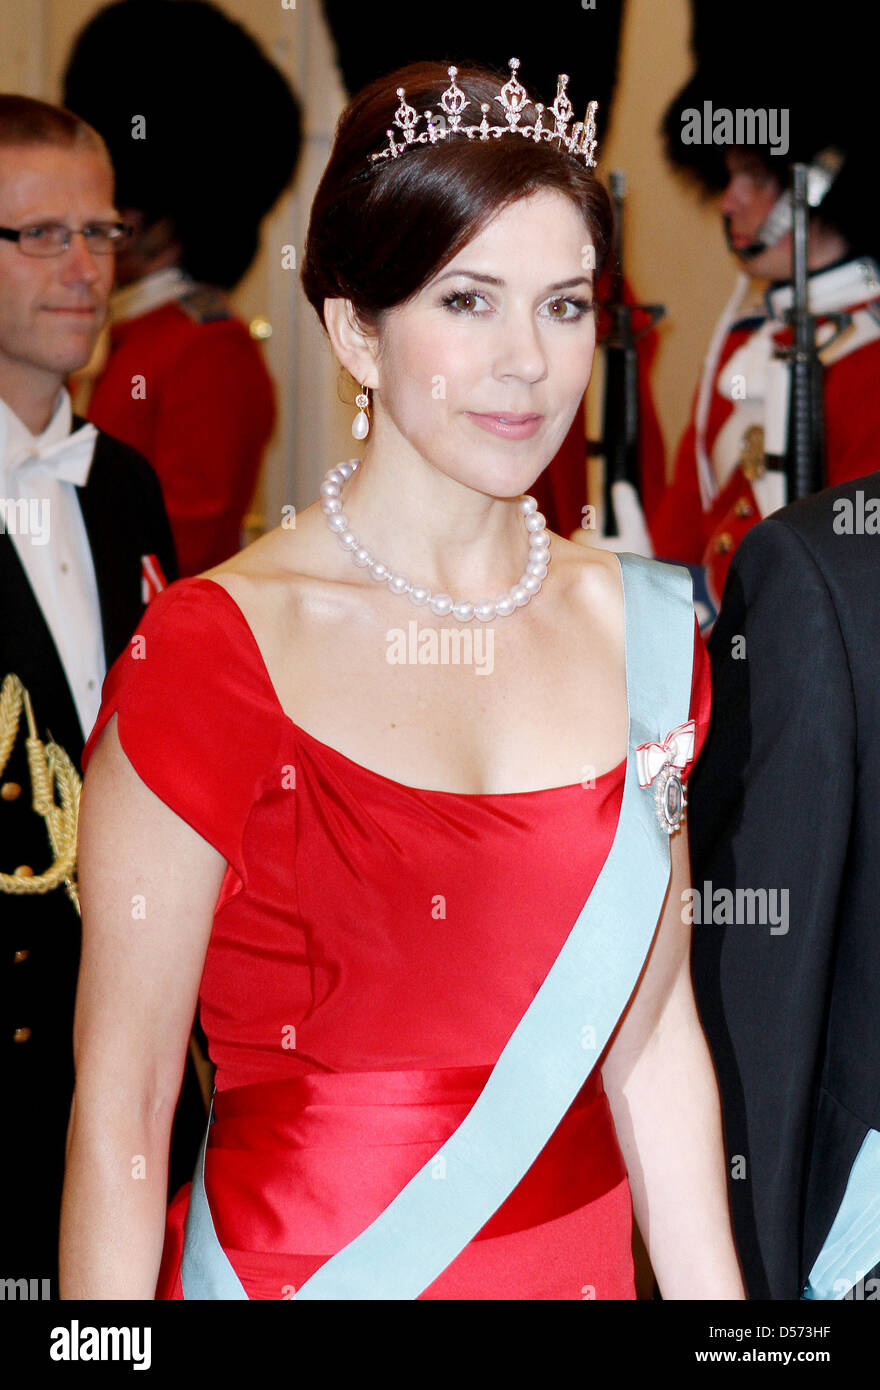 crown-princess-mary-of-denmark-arrives-for-the-official-dinner-party-D573HF.jpg